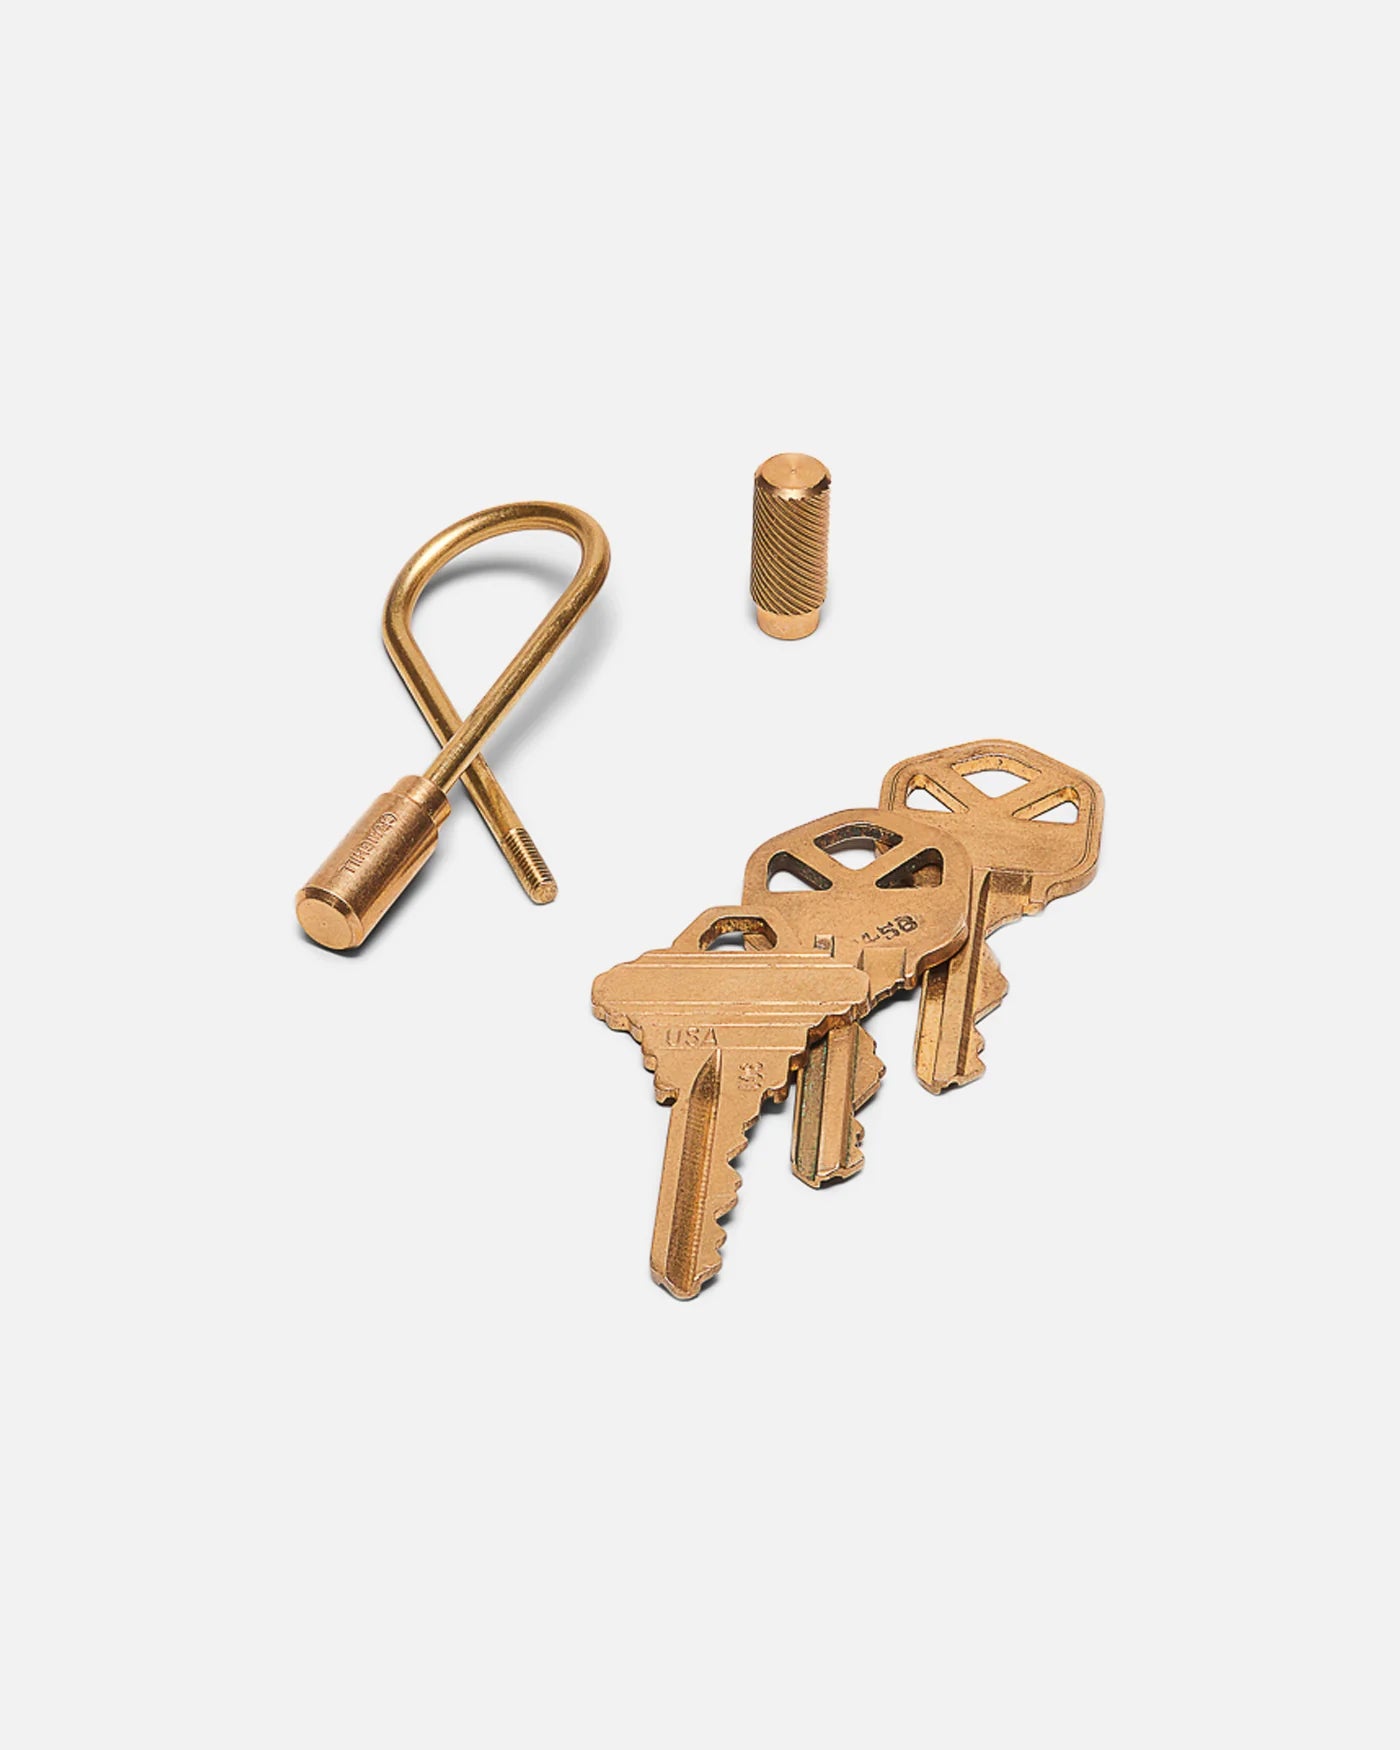 Closed Helix Key Ring - Brass